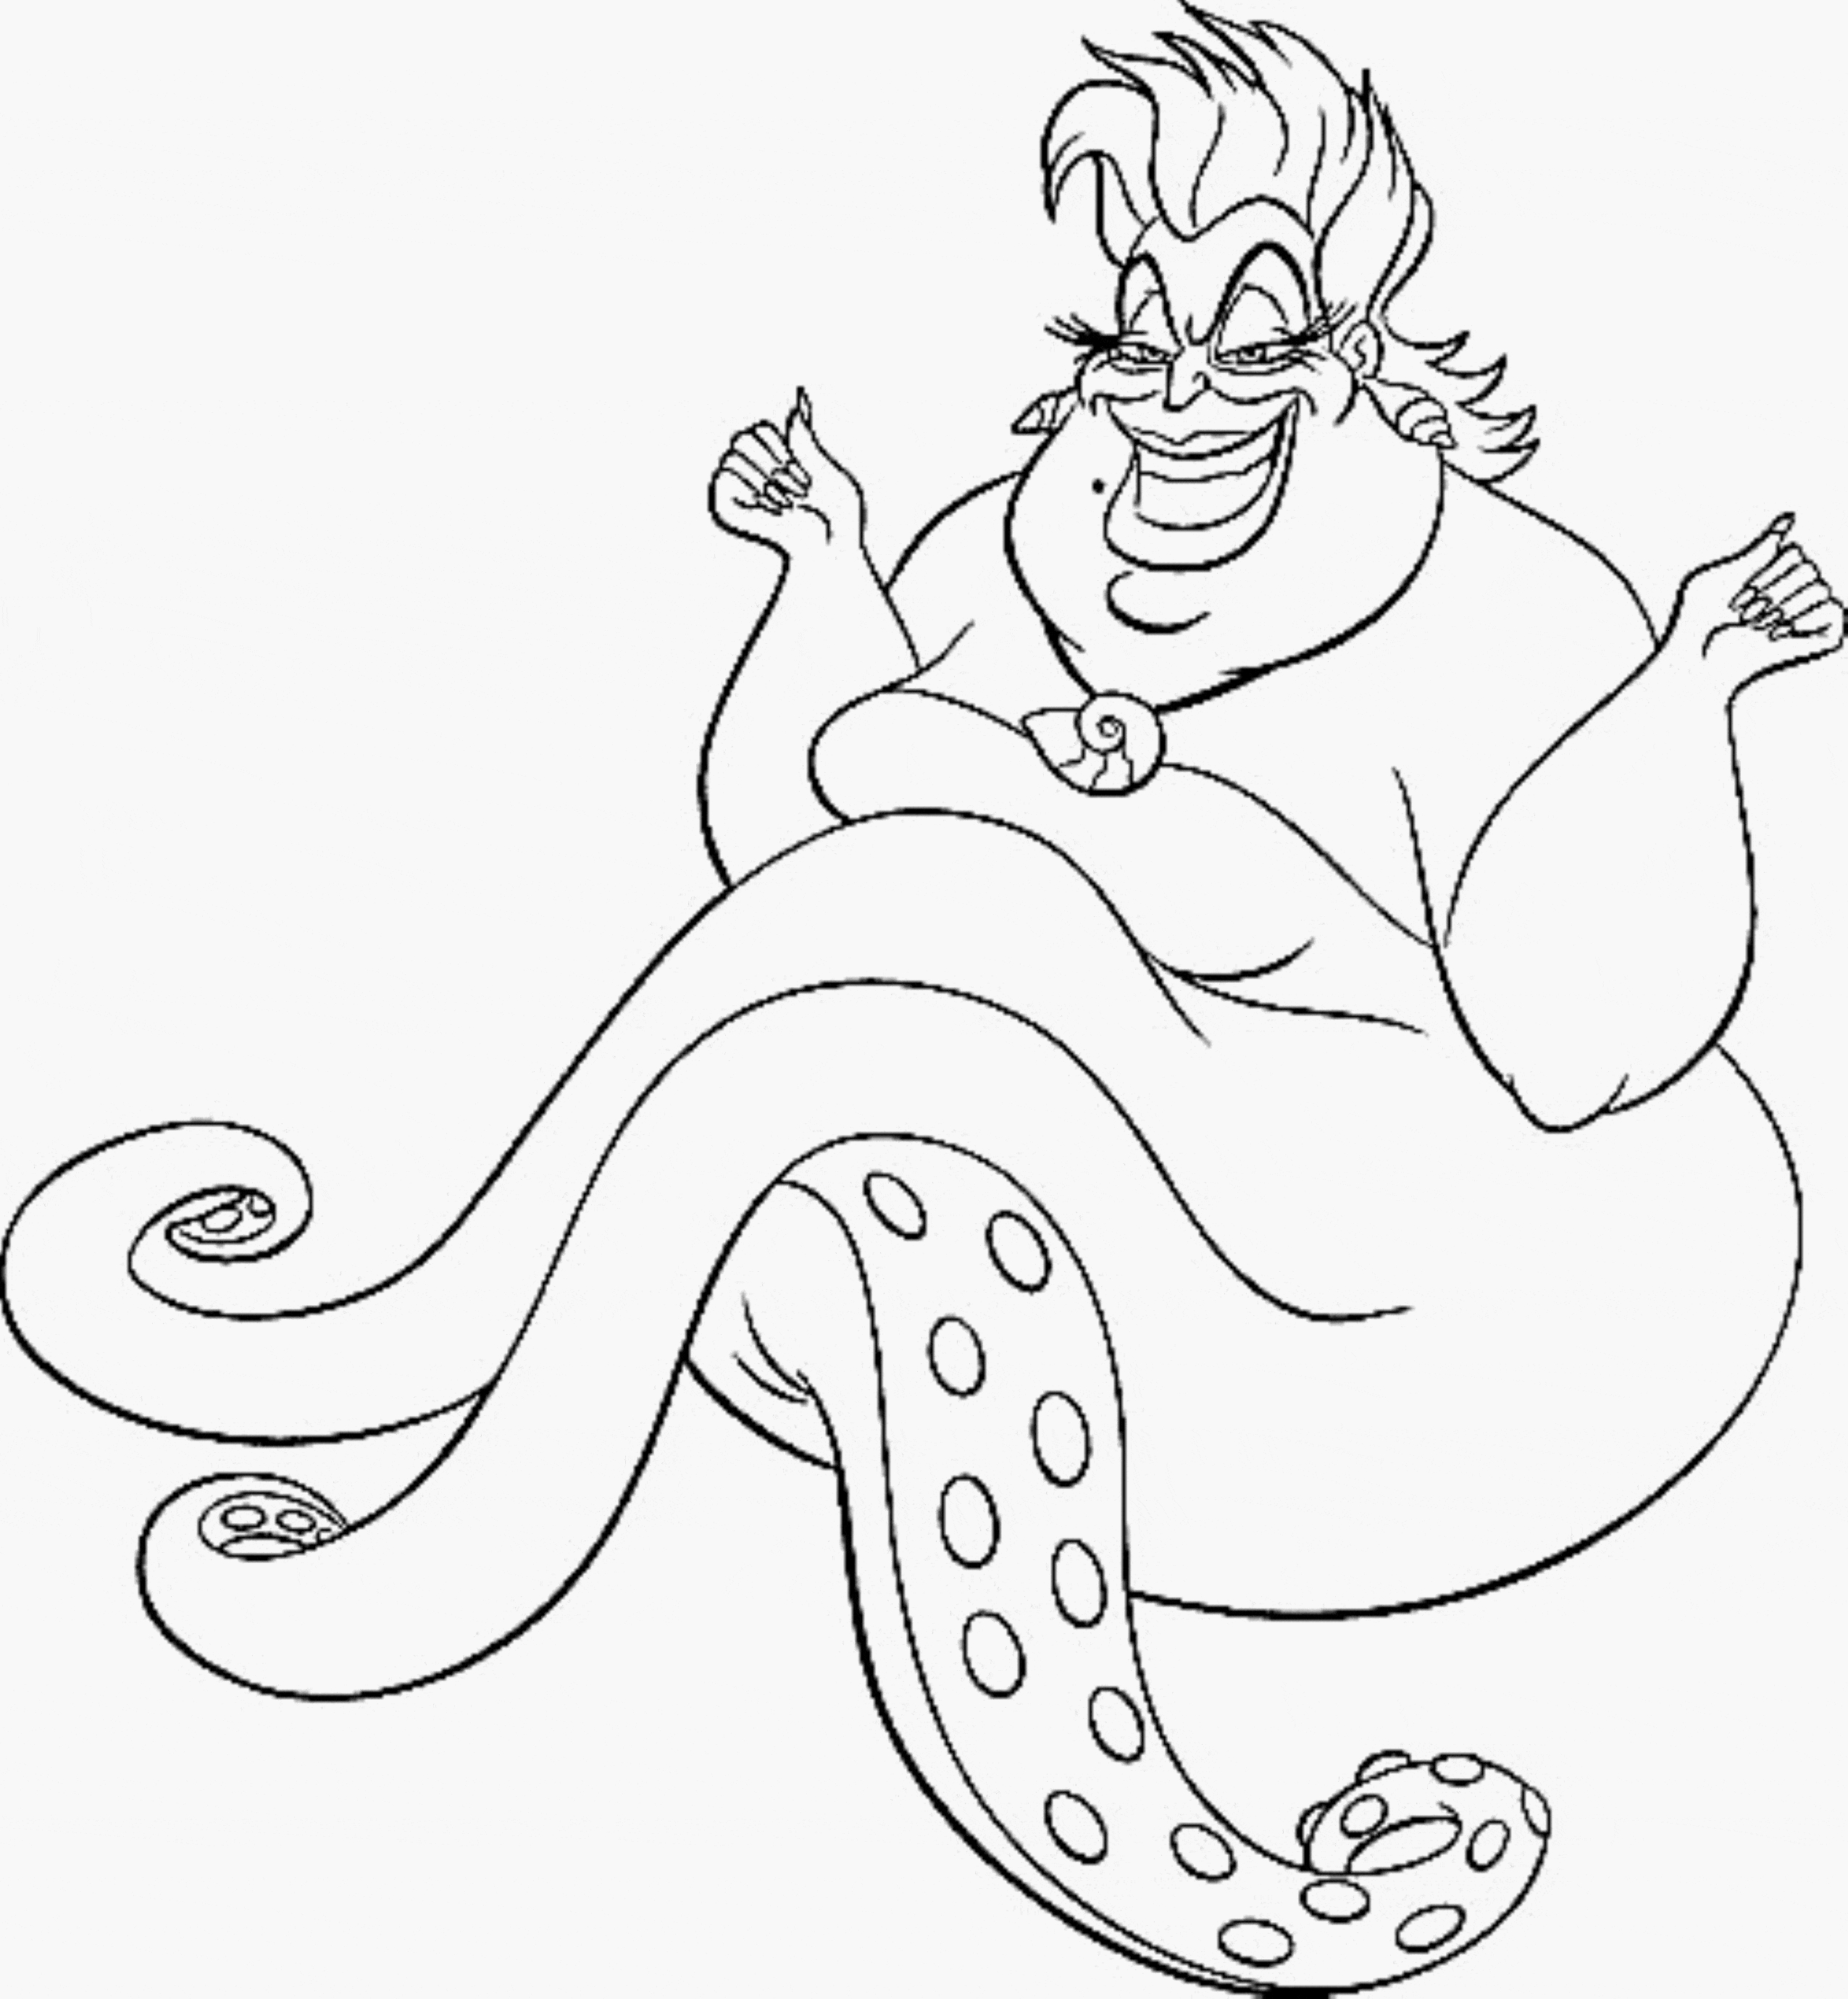 Coloring Pages Of Little Mermaid Find The Suitable Little Mermaid Coloring Pages For The Kids Best